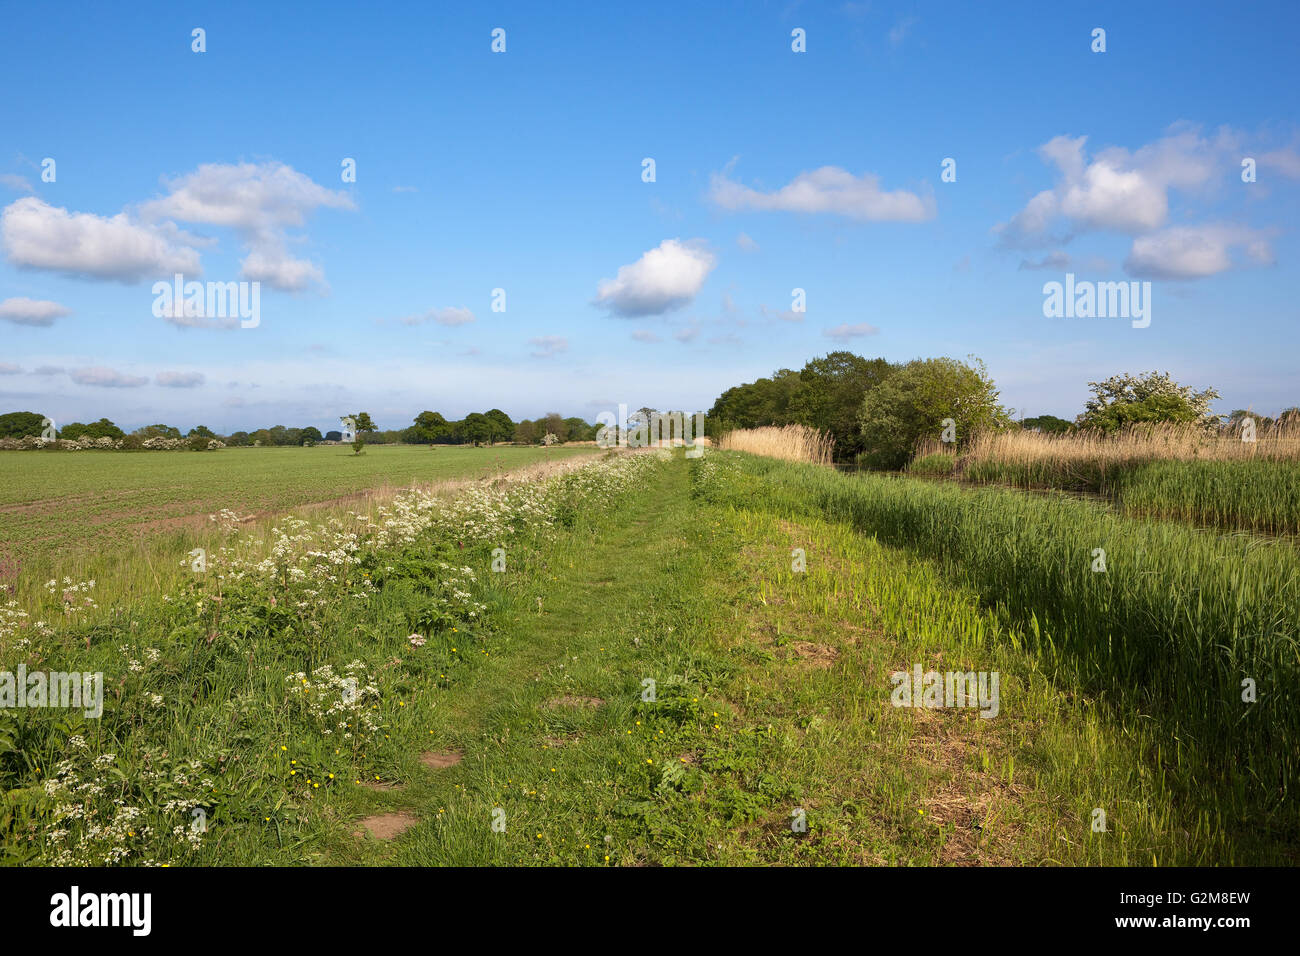 A grassy canal towpath with wildflowers, trees and hawthorn hedgerows beside agricultural land under a blue cloudy sky in May Stock Photo